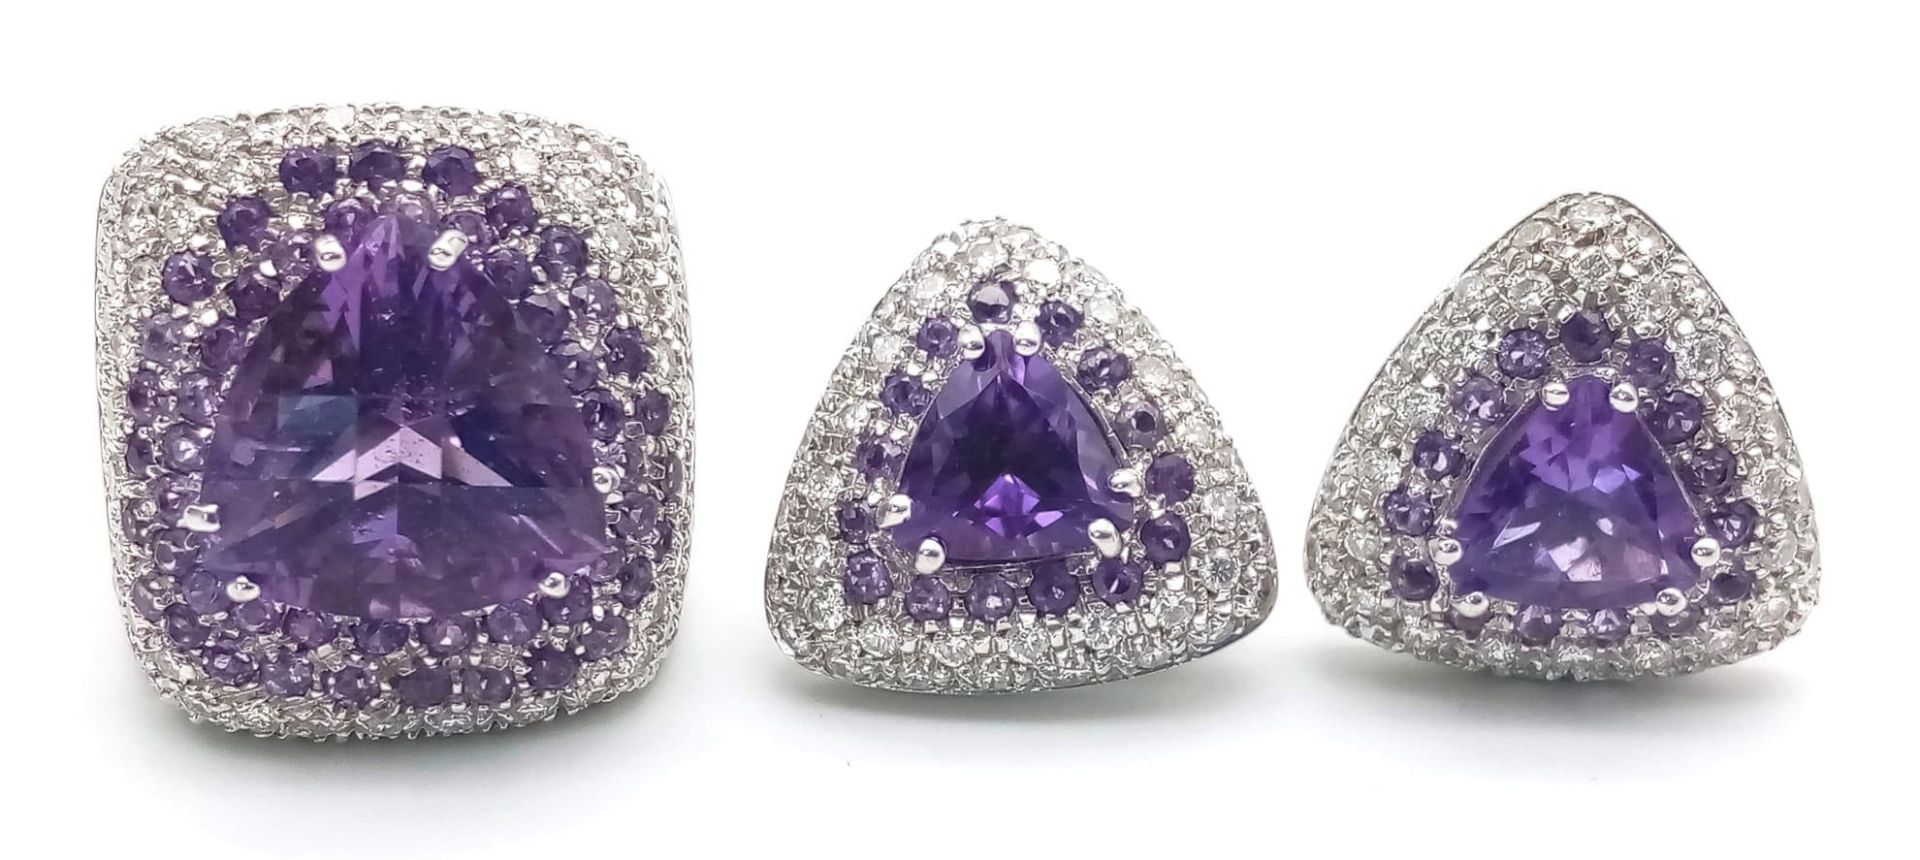 A FABULOUS 18K WHITE GOLD DIAMOND AND AMETHYST RING WITH MATCHING EARRINGS . 35.5gms